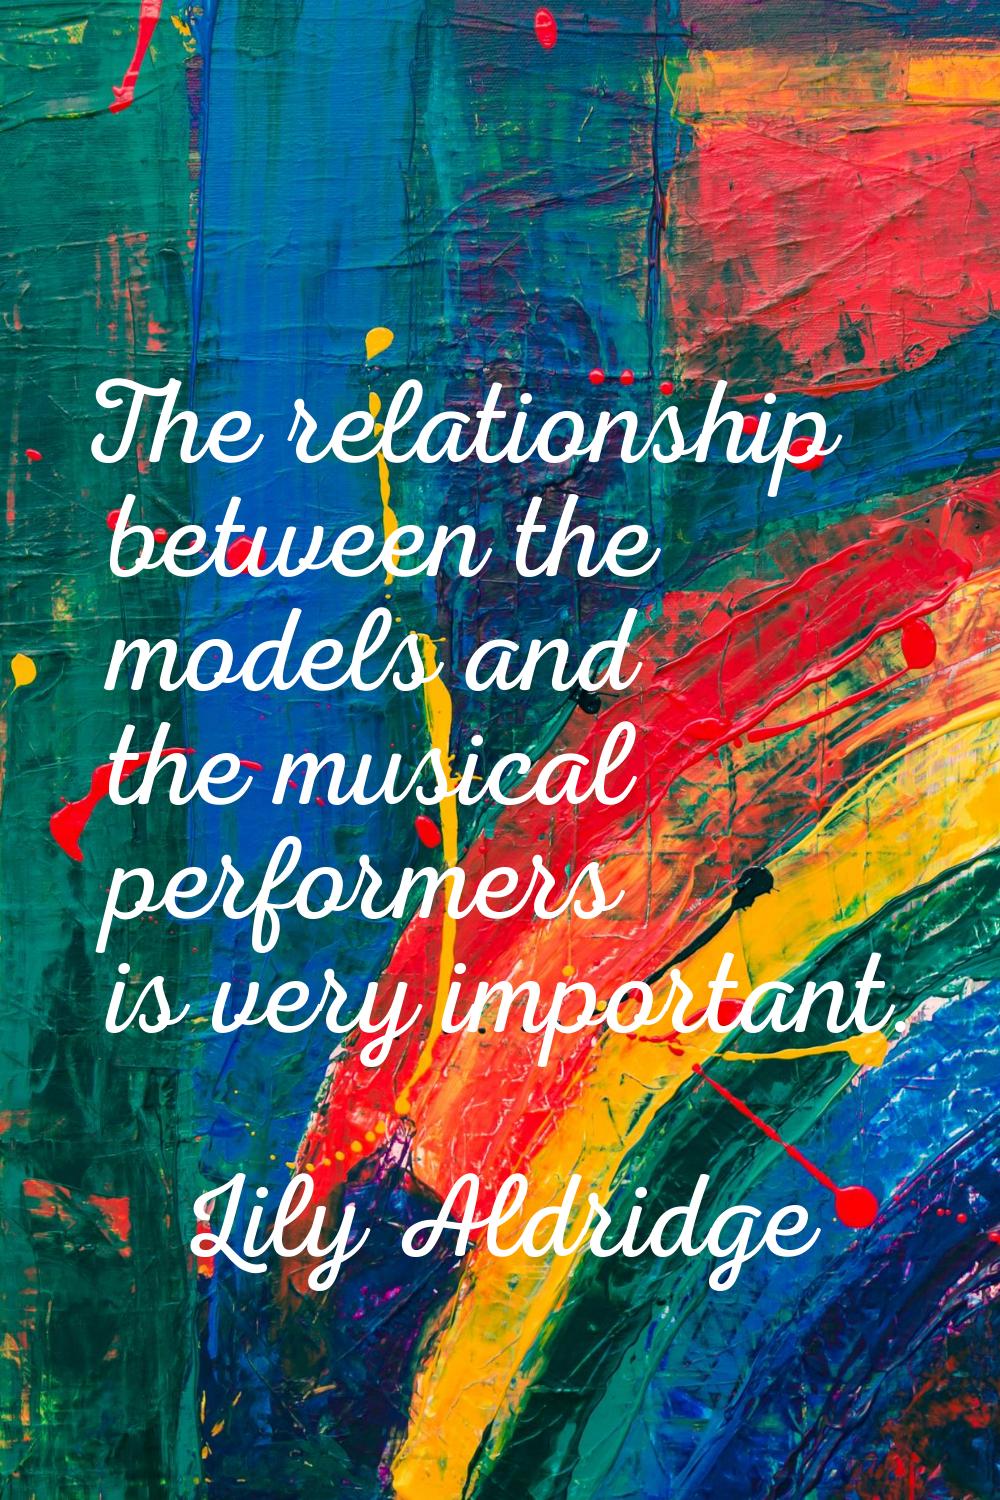 The relationship between the models and the musical performers is very important.